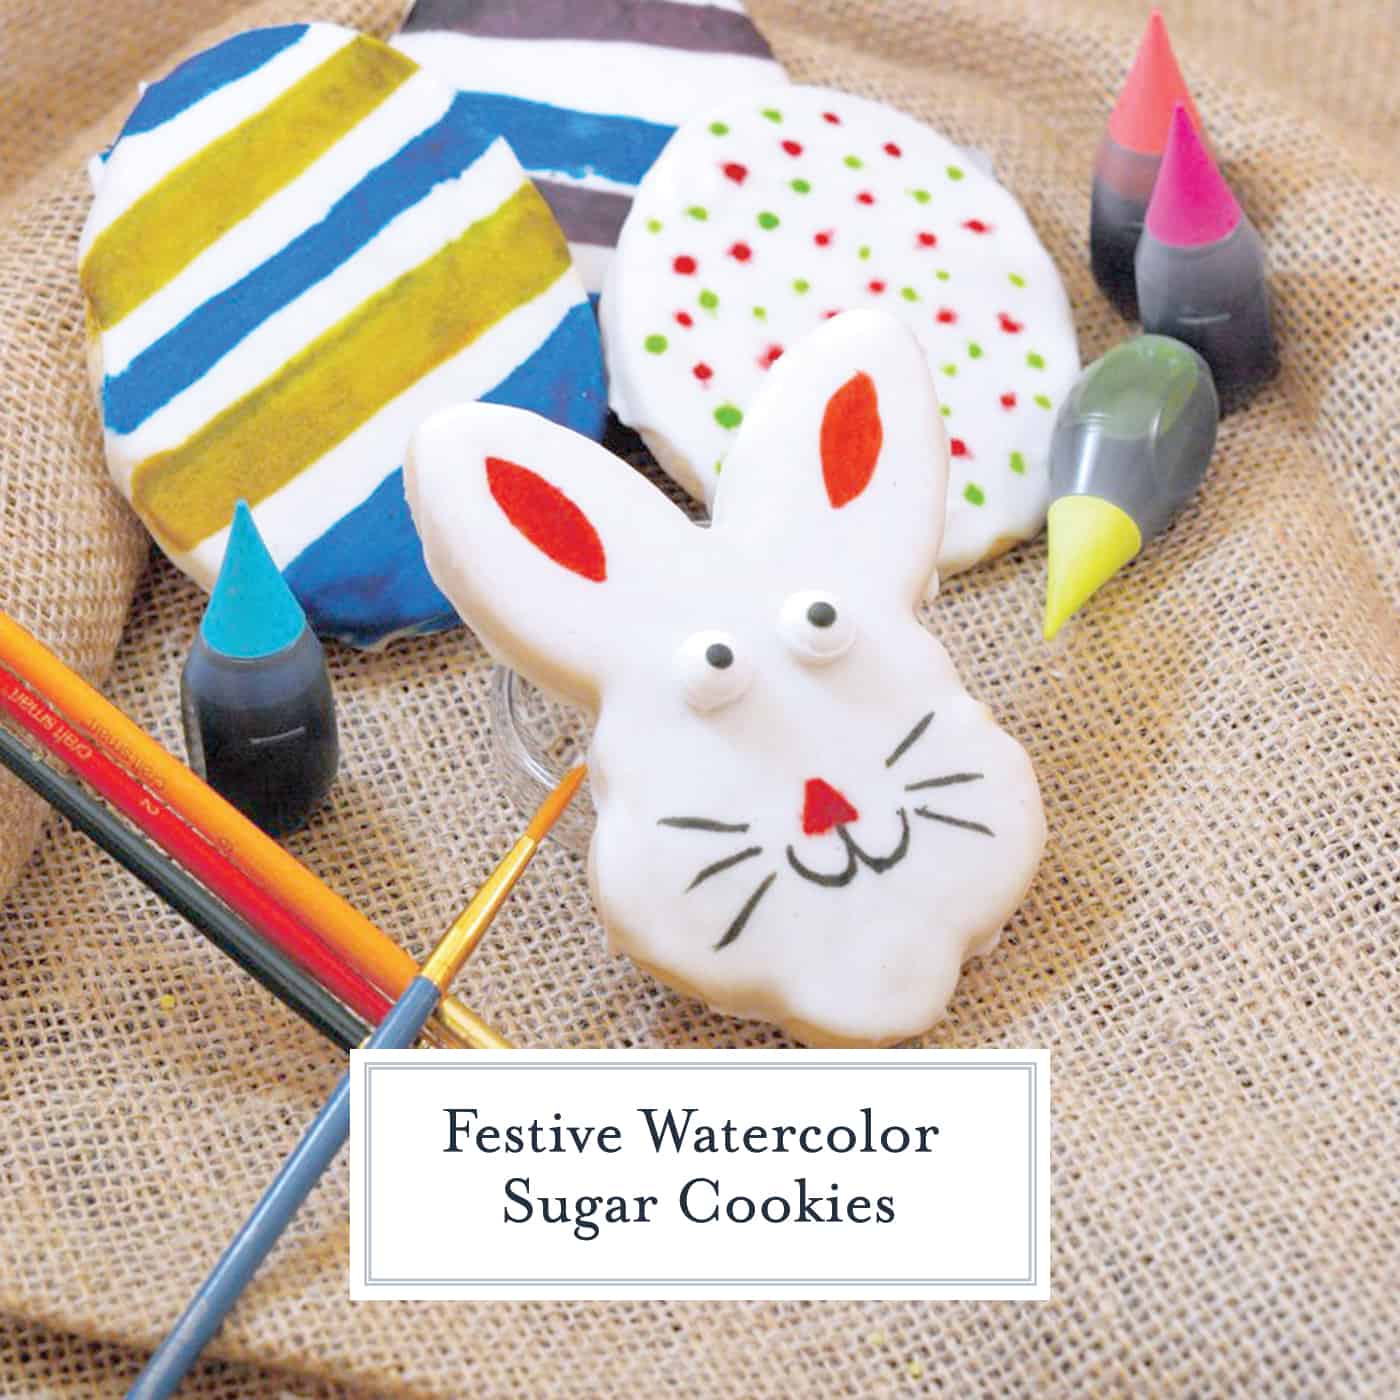 Watercolor Sugar Cookies can be made for any holiday, but I like them best for Easter. Easter Egg Cookies and Bunny Cookies are just so pretty with the soft glow of watercolor! #watercolorsugarcookies #sugarcookiecutouts #eastercookies www.savoryexperiments.com 